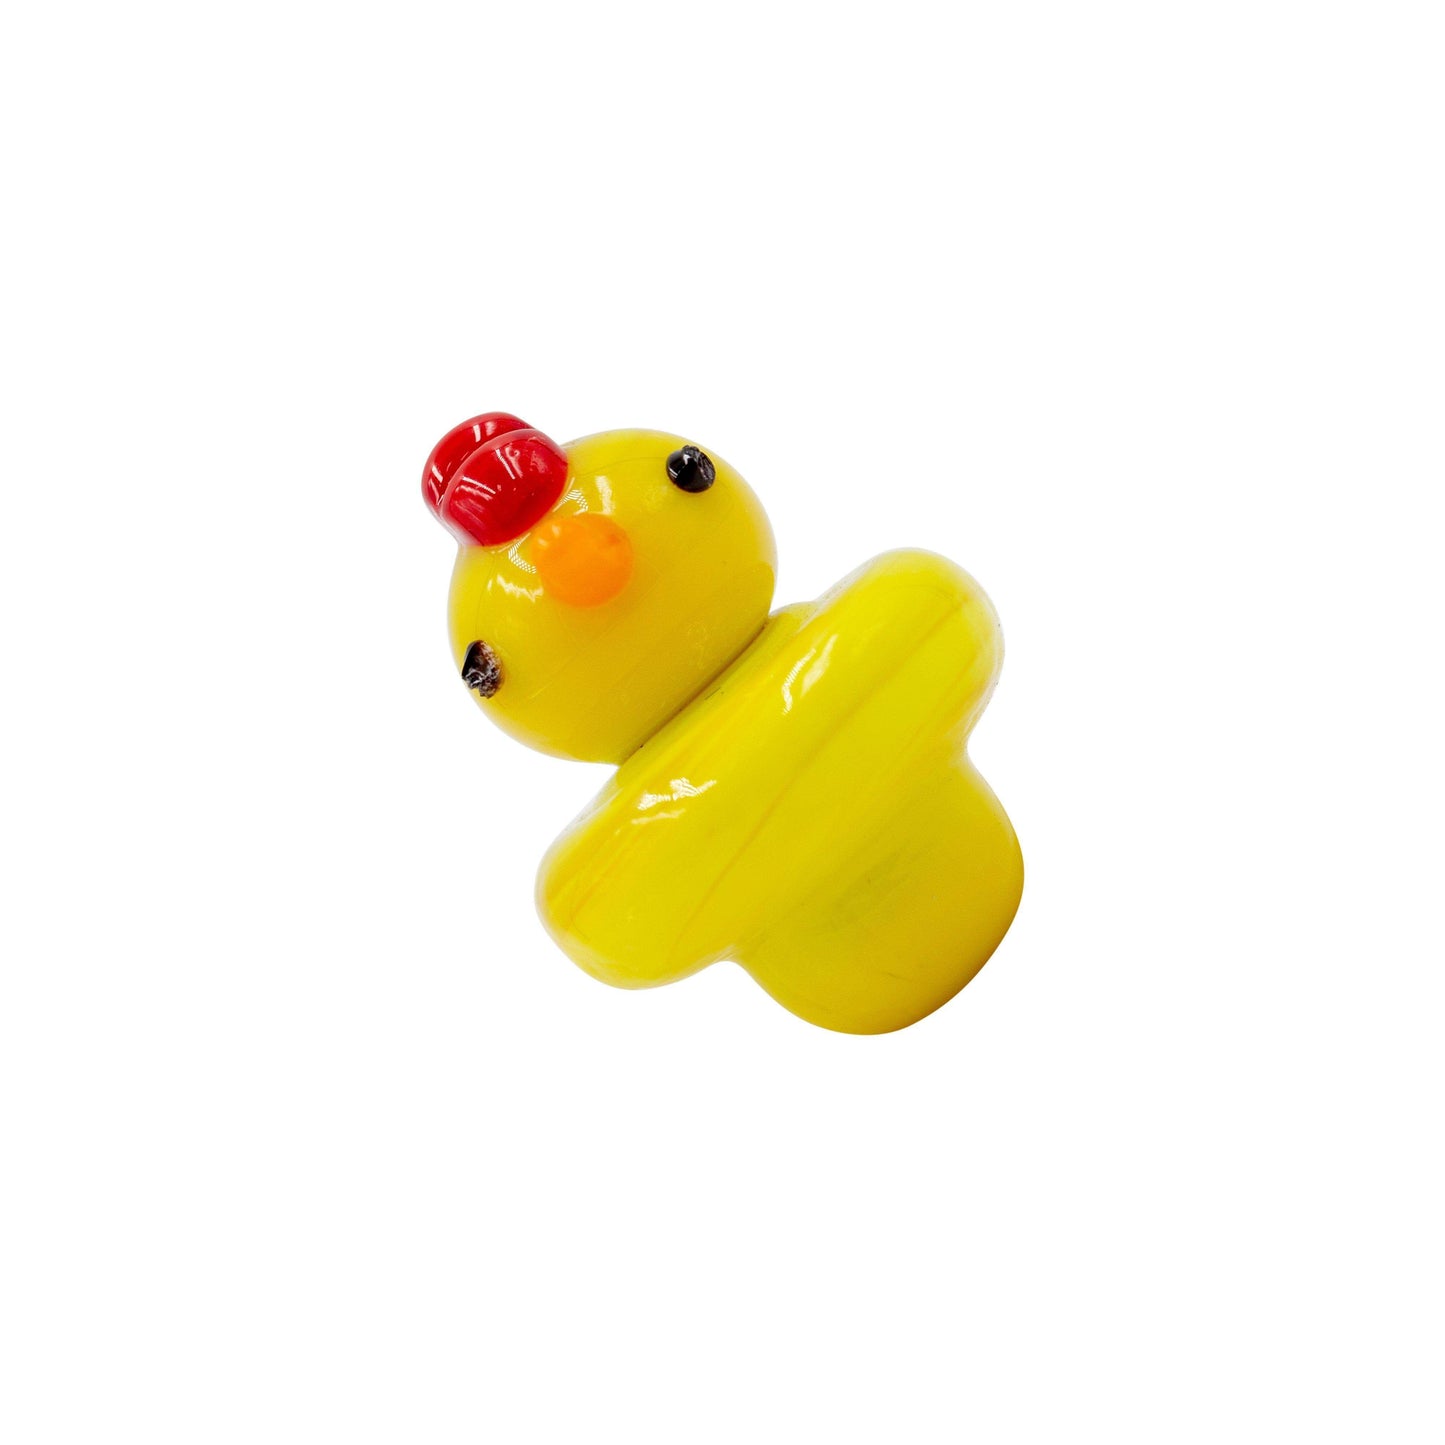 Cute pocket-friendly carb cap made of glass with an chicken with a comb on head look and shape